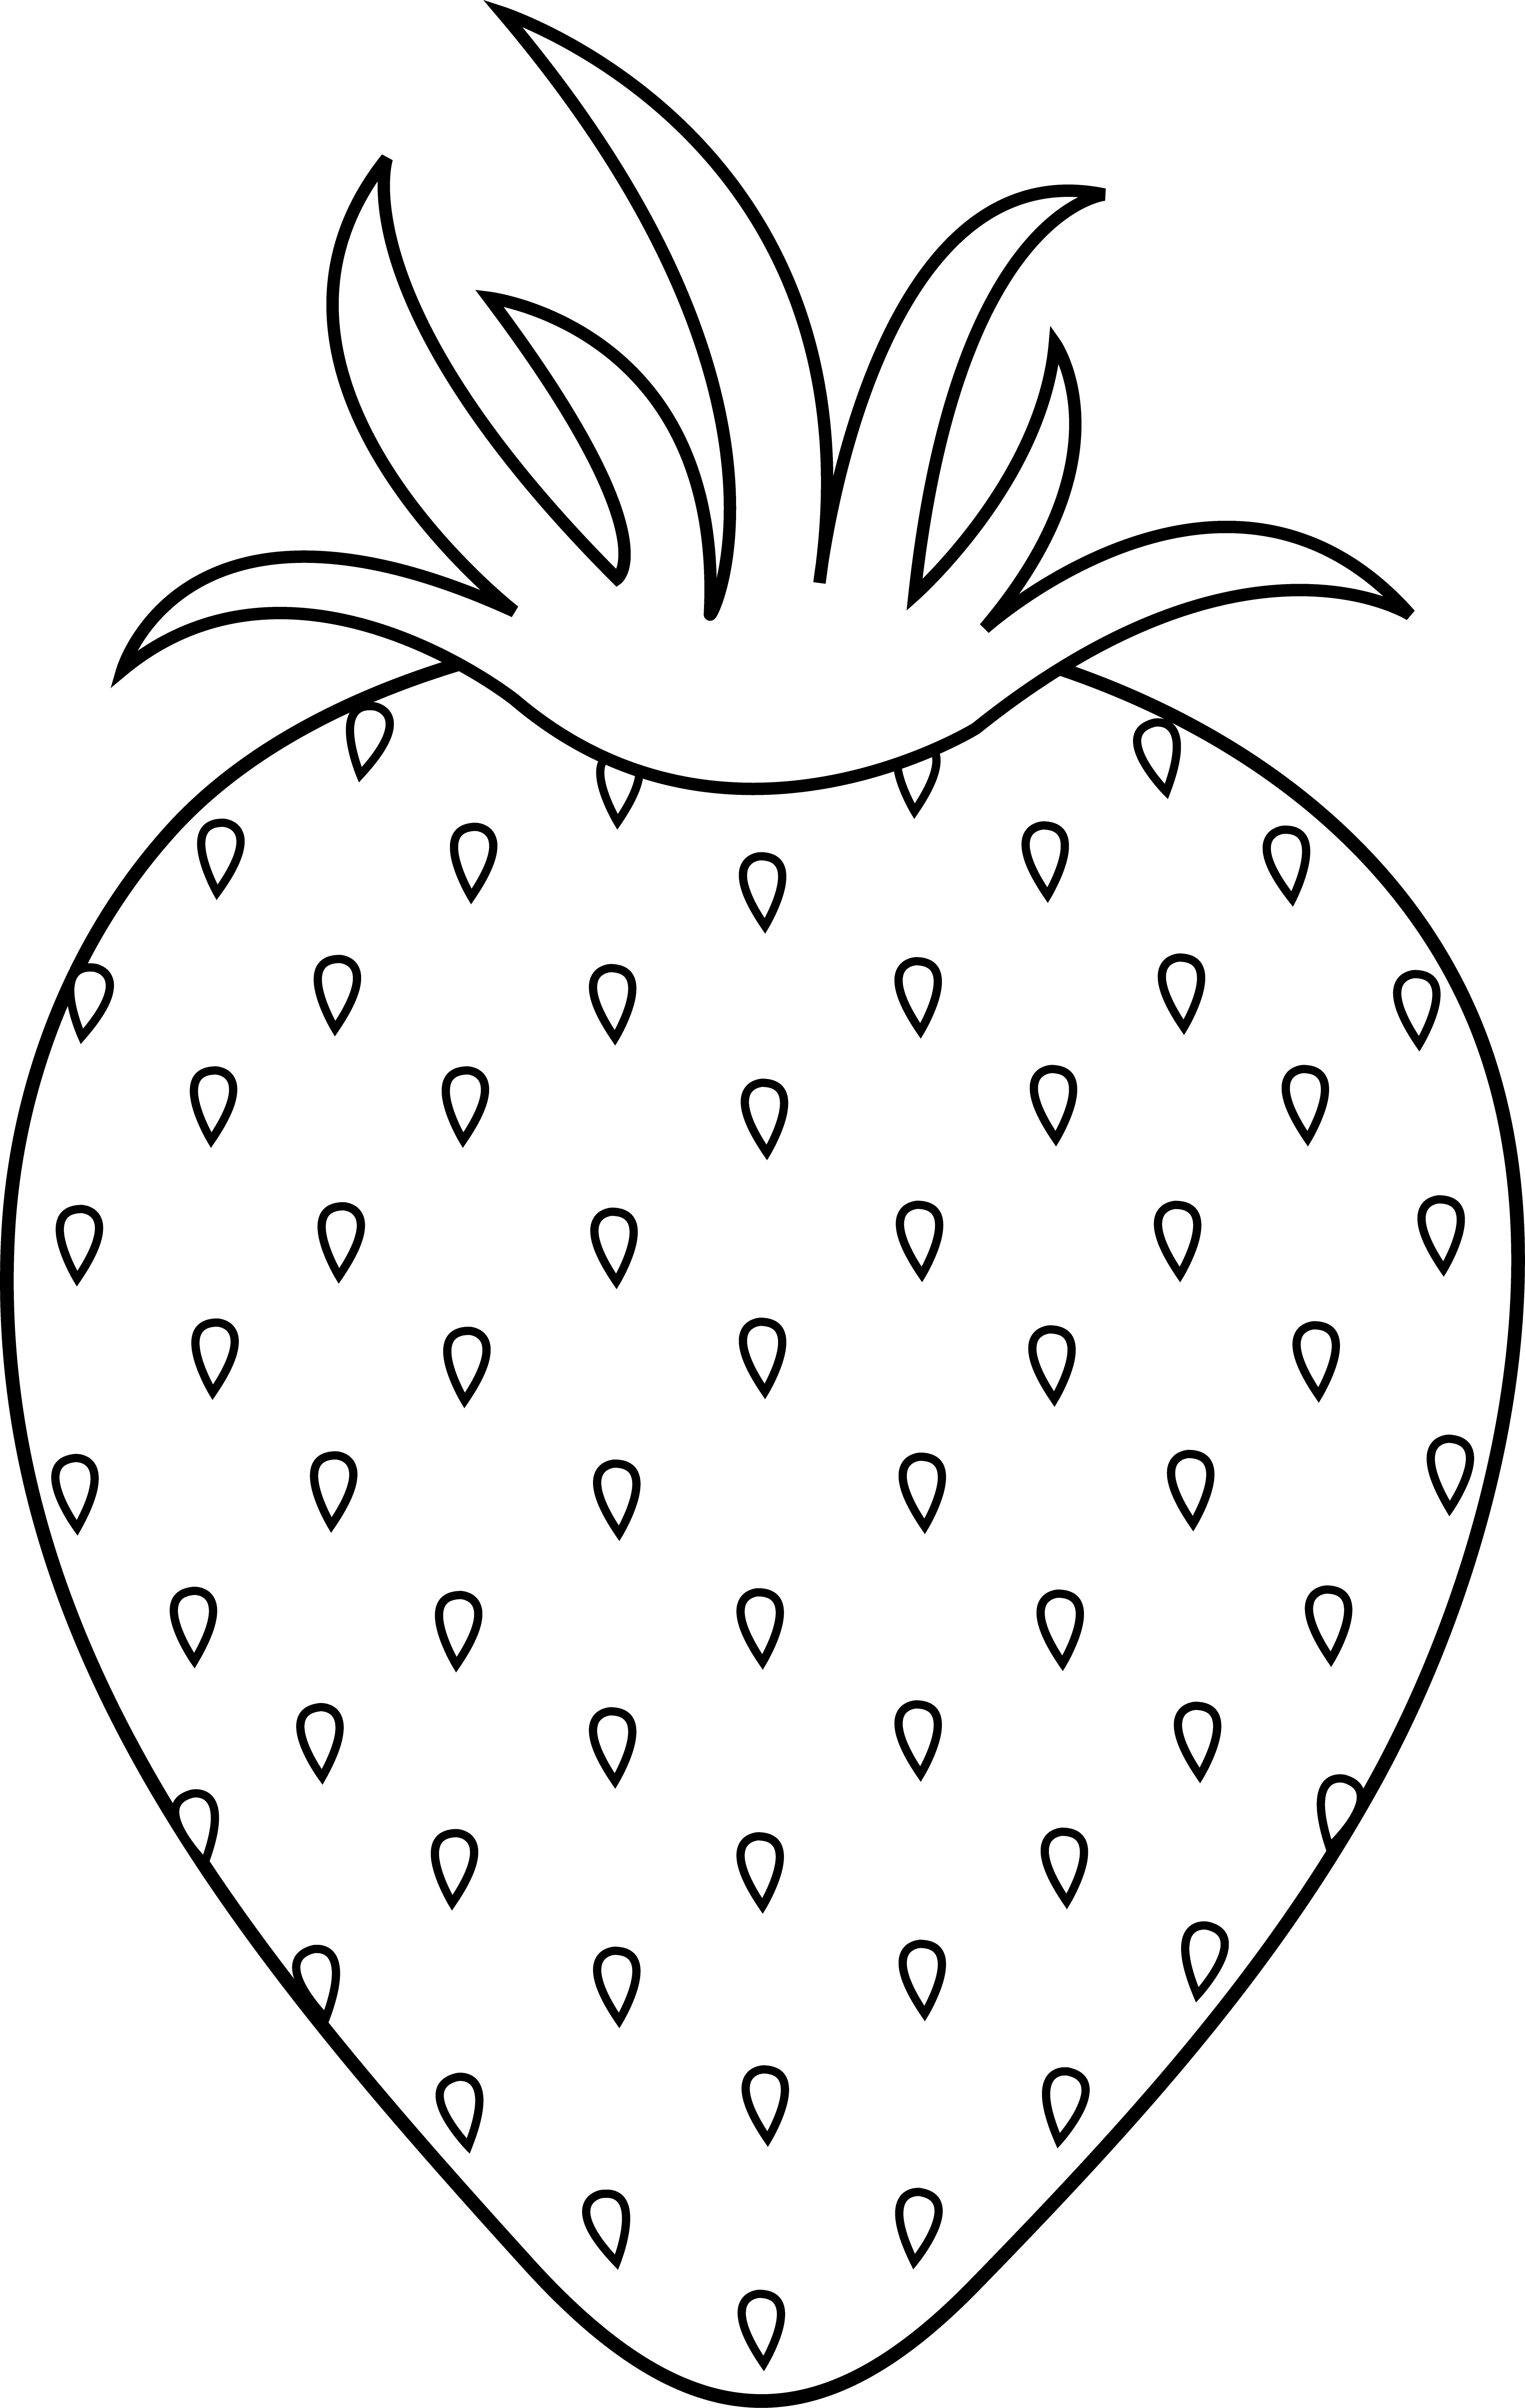 Strawberries clipart fruitsblack. Strawberry colorable lineart free